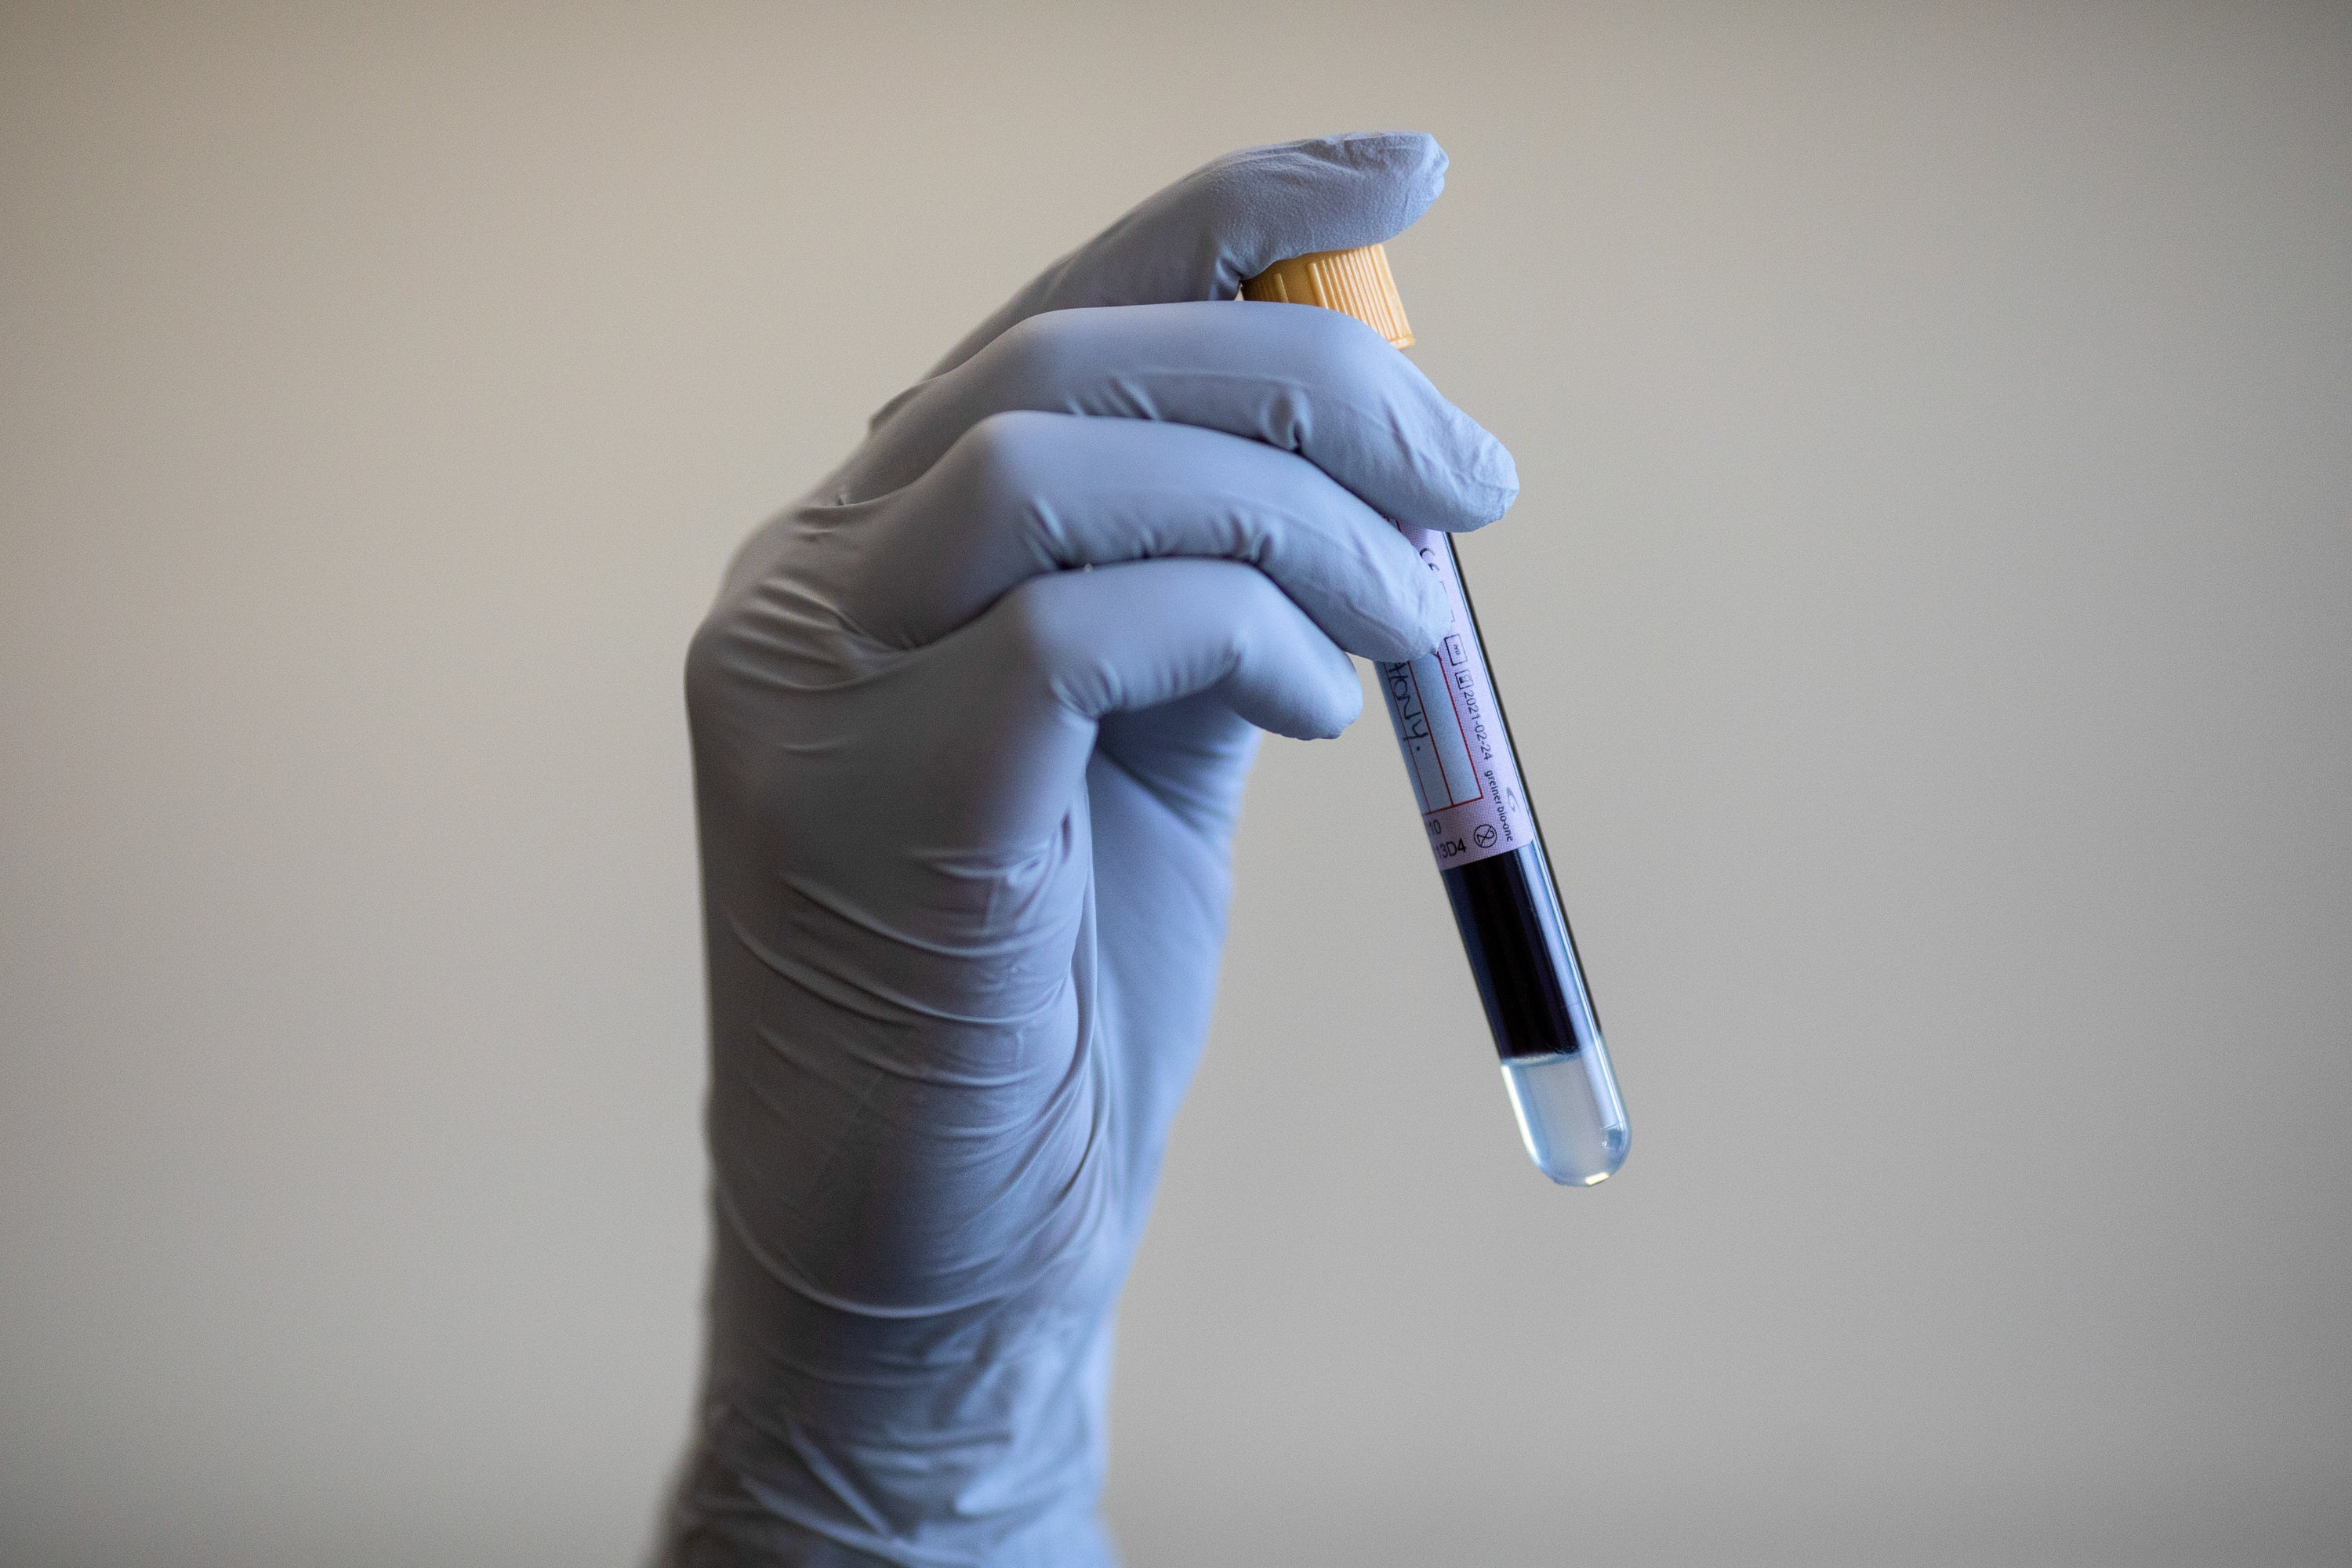 Just 5ml of blood is needed for the test that detects circulating tumour cells